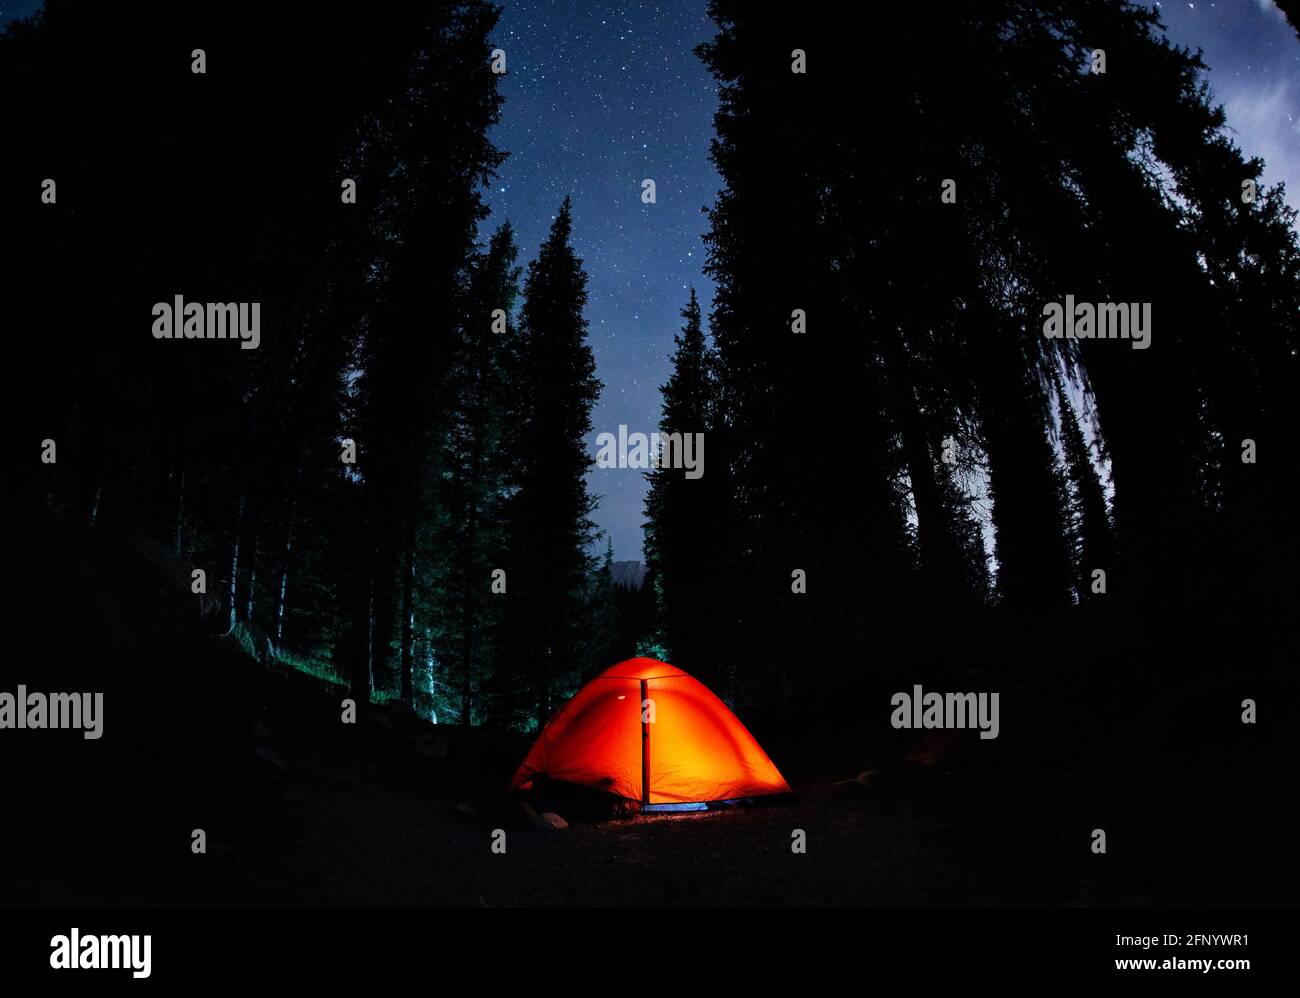 Orange gloving tent at camping in the mountain forest with spruce tree under night sky with stars Stock Photo